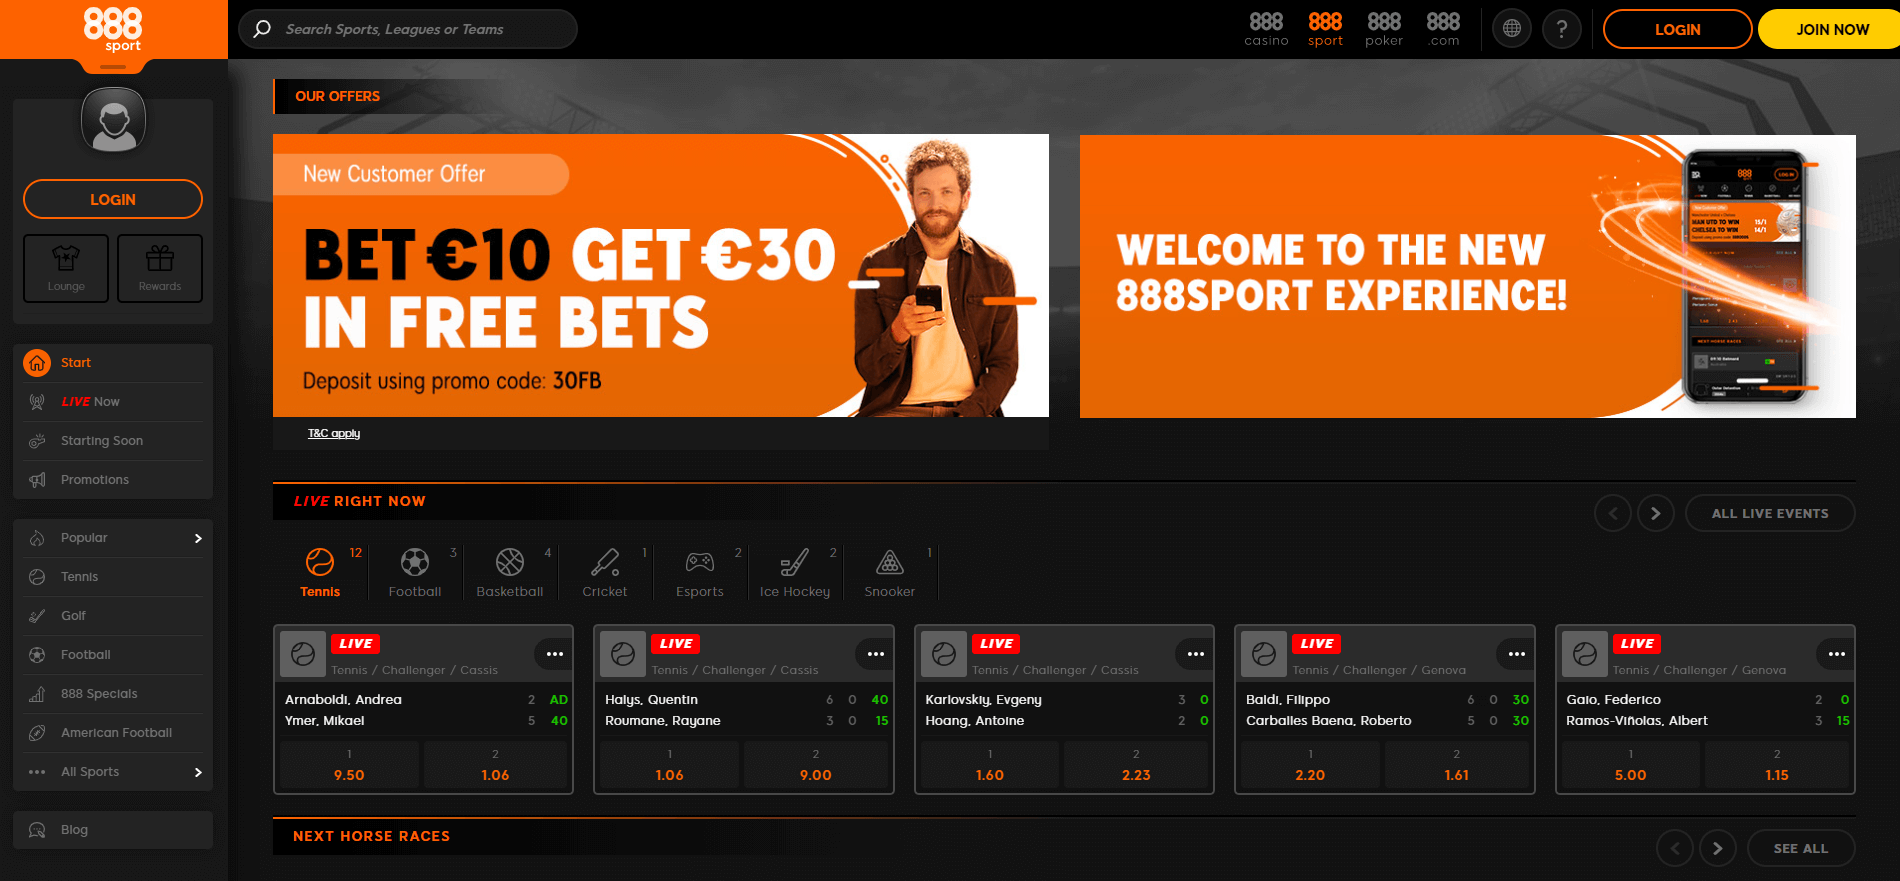 888sport new customer offers how csgo lounge betting works cited